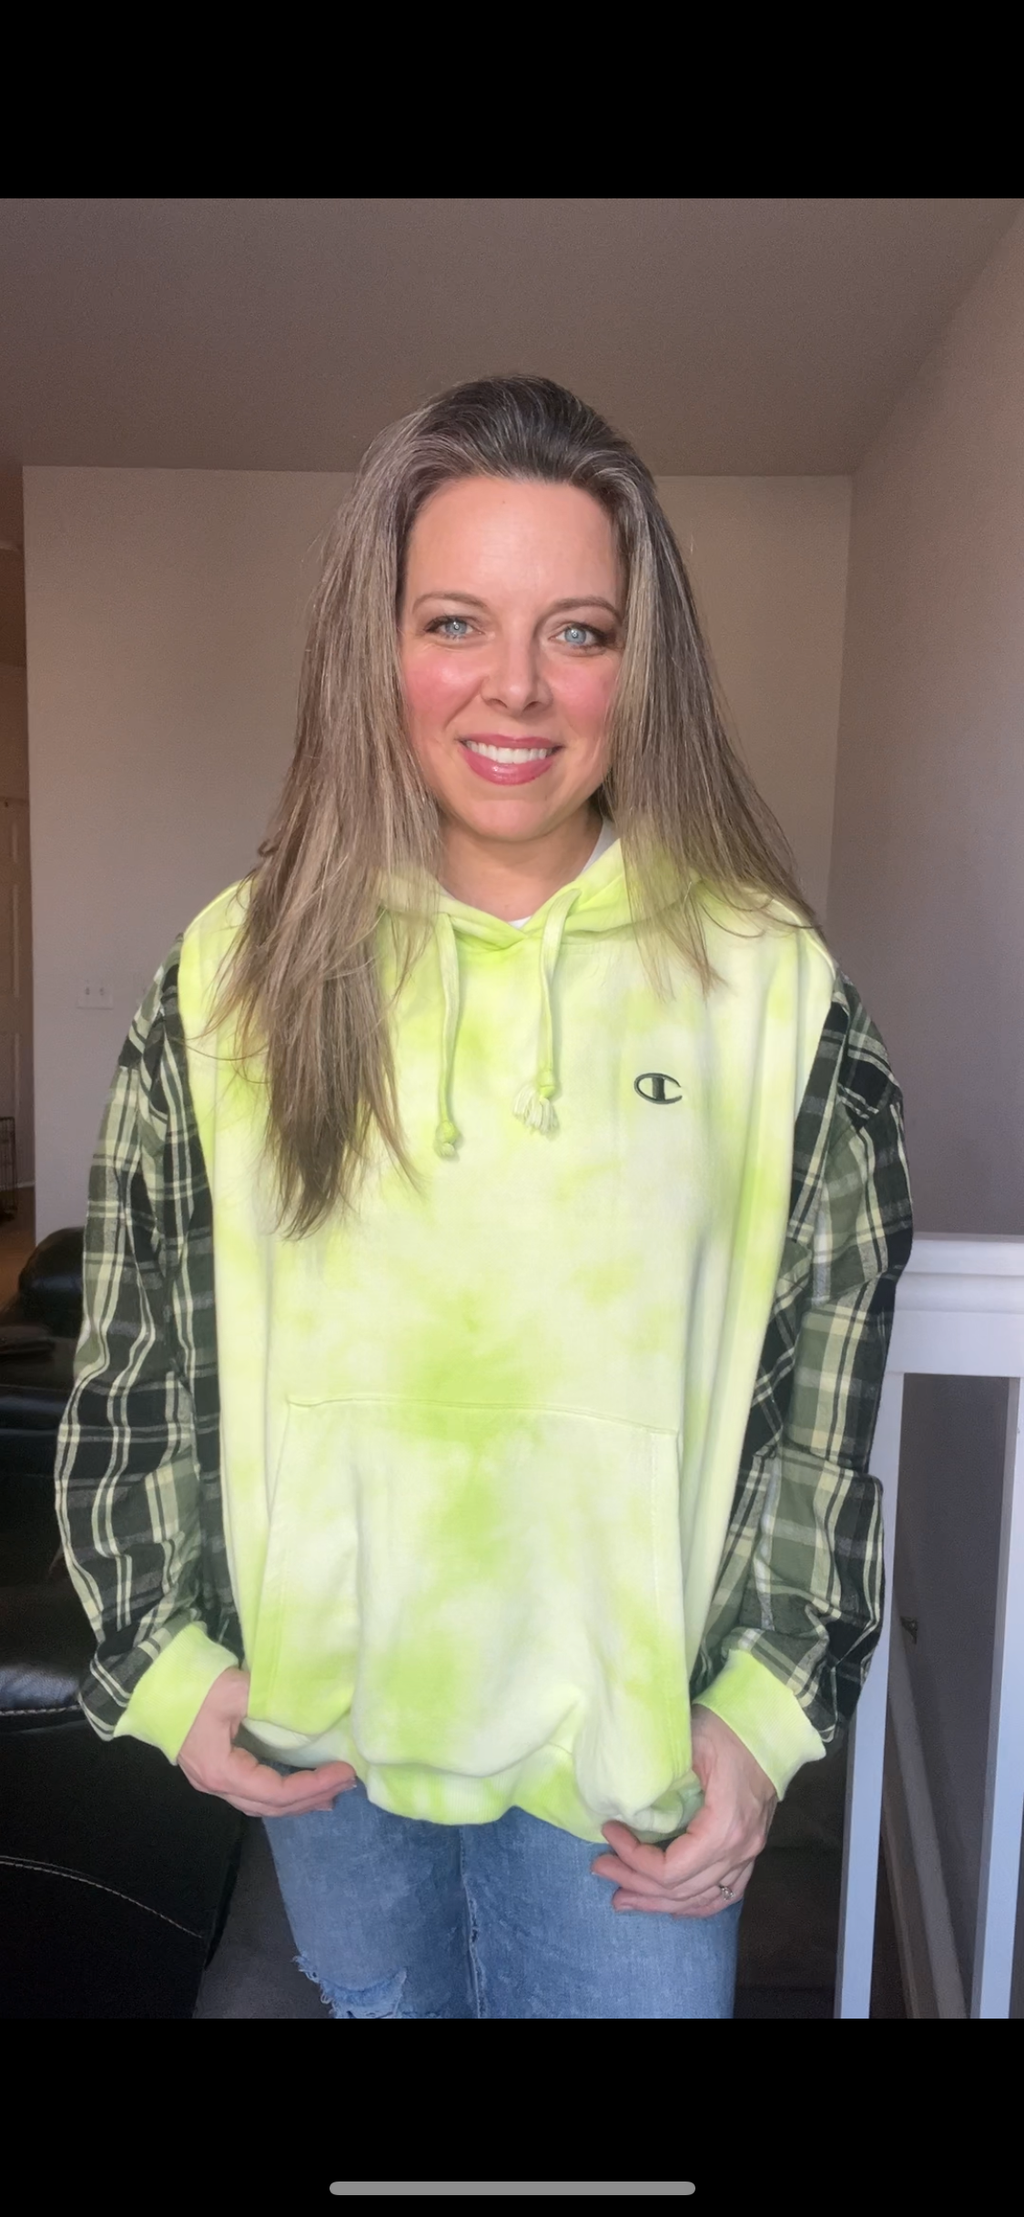 Upcycled Neon Champion – women’s L/XL – midweight sweatshirt with flannel sleeves￼